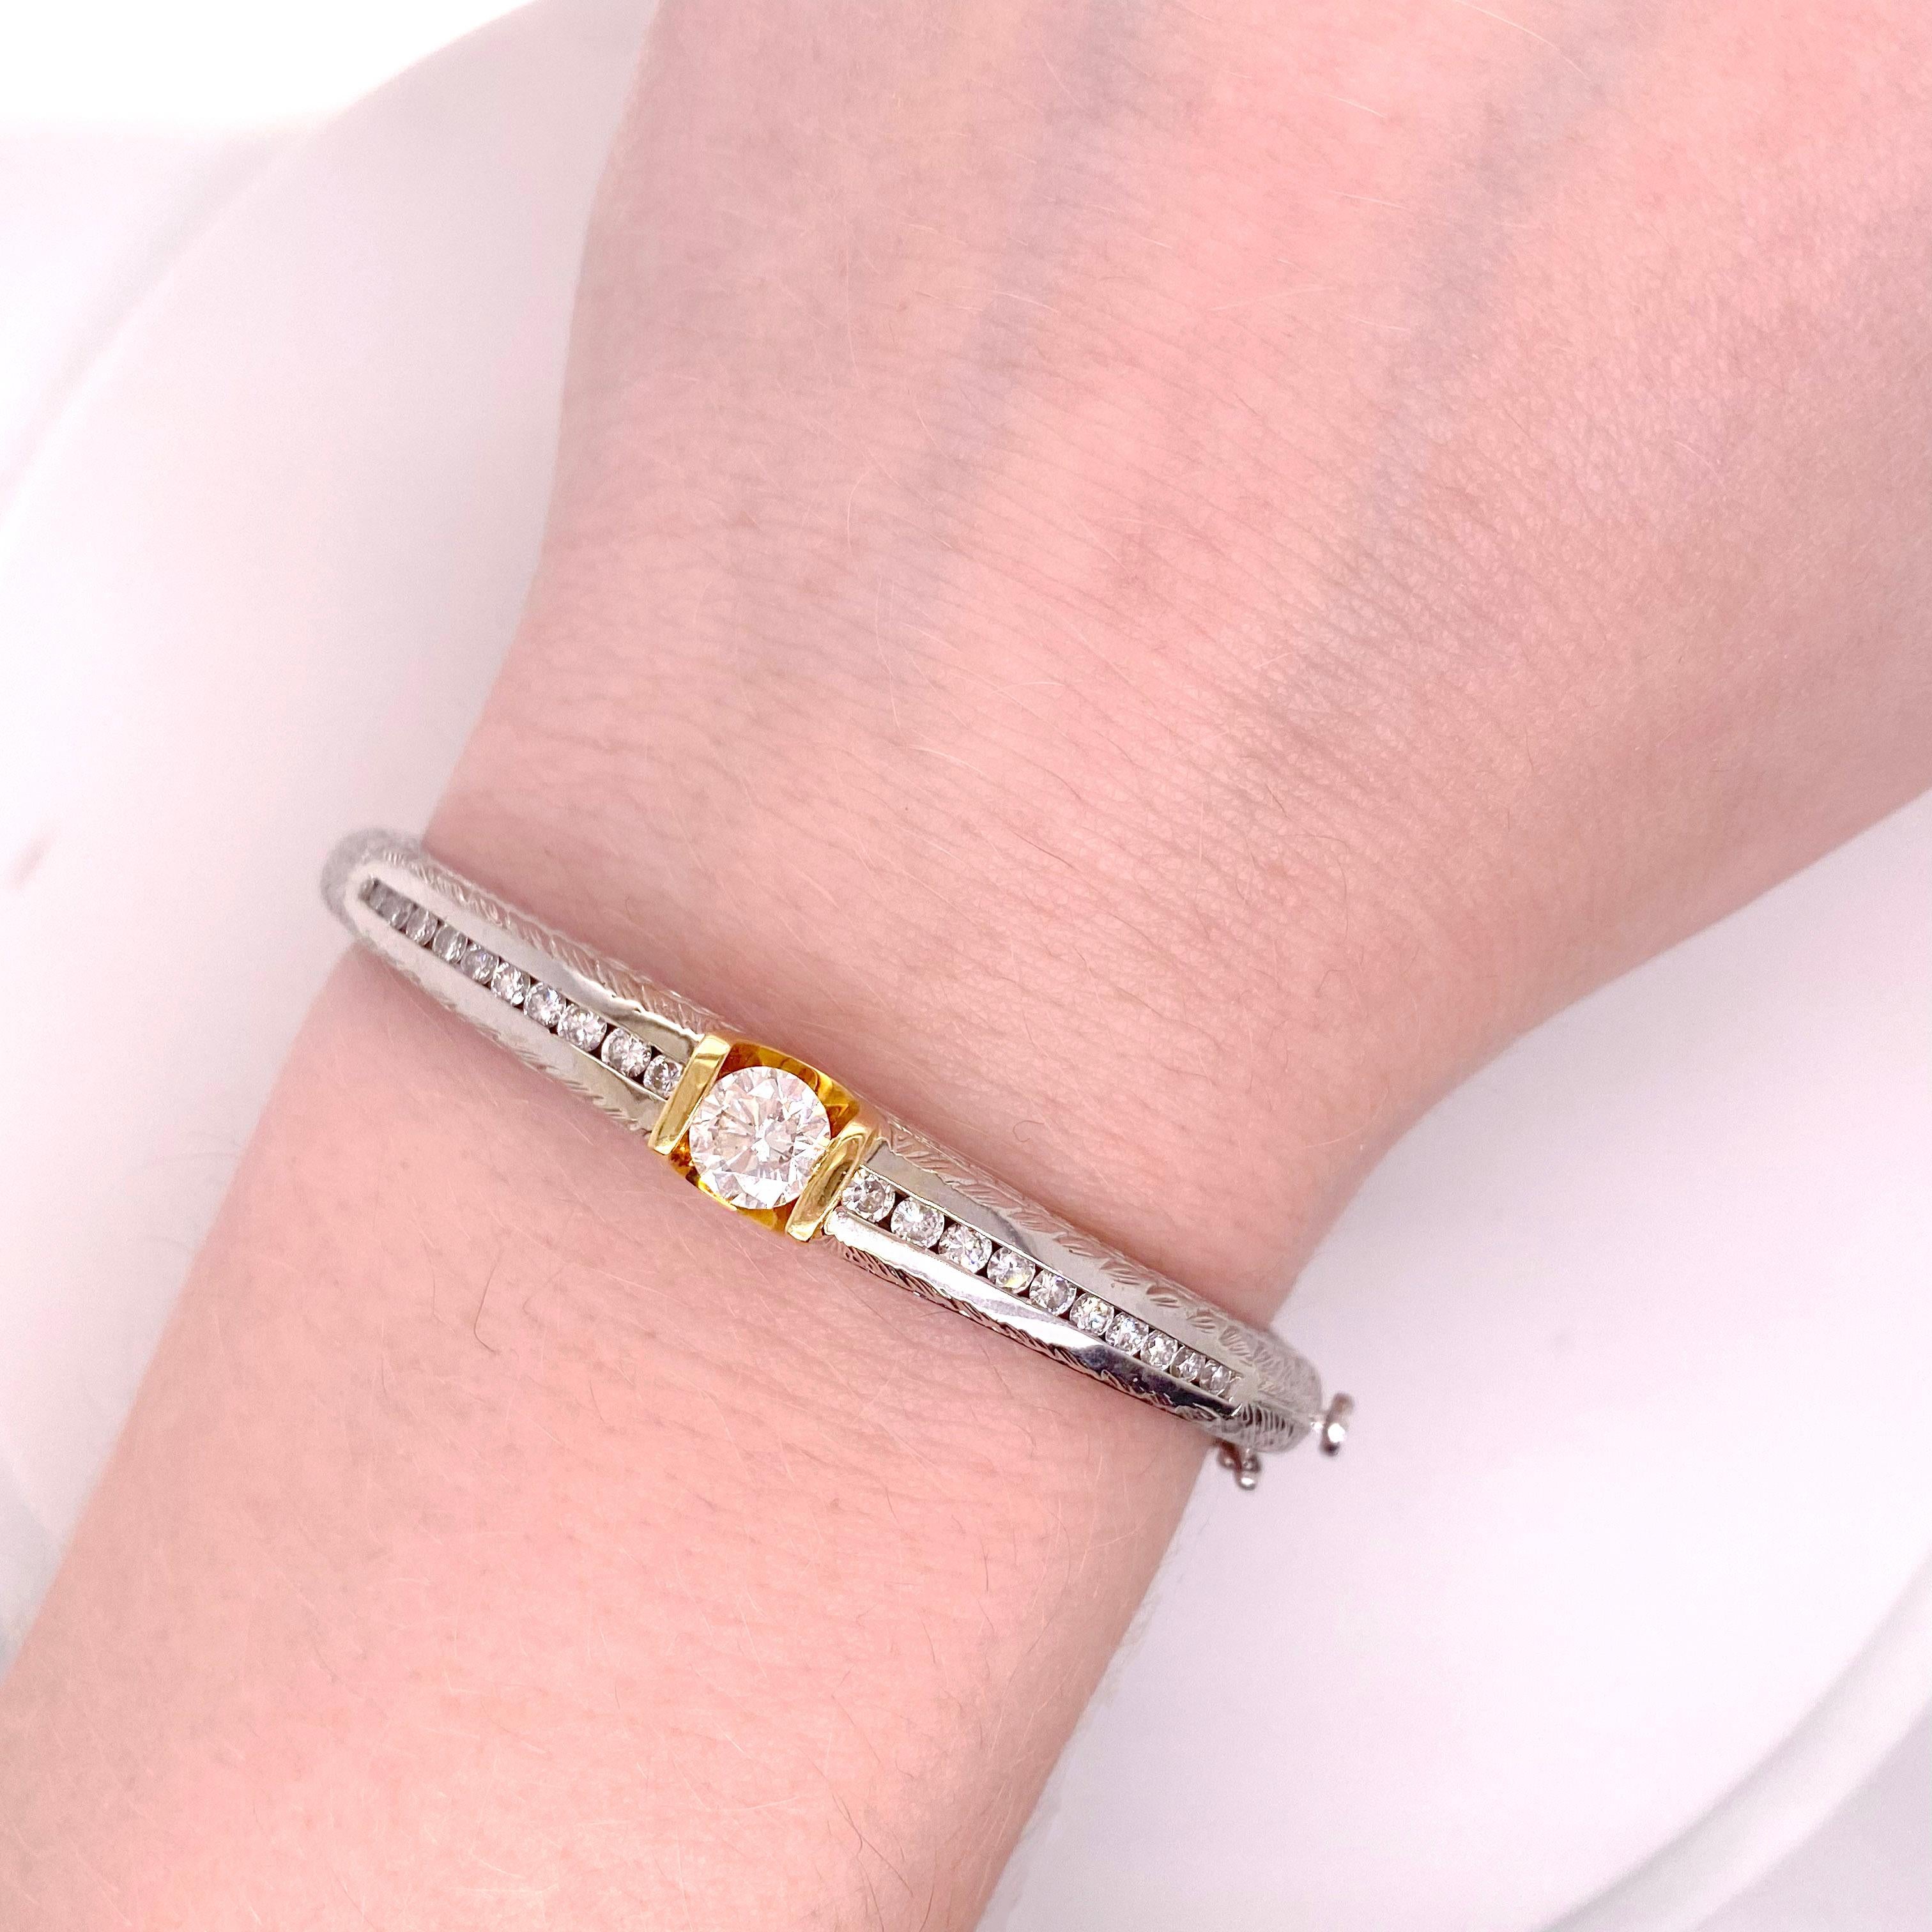 This bangle bracelet has one larger gorgeous diamond set in 14 karat yellow gold and then there are 20 diamonds that are channel set going do the center of the bracelet.  This bracelet is heavy and will never bend or dent as it is solid and not